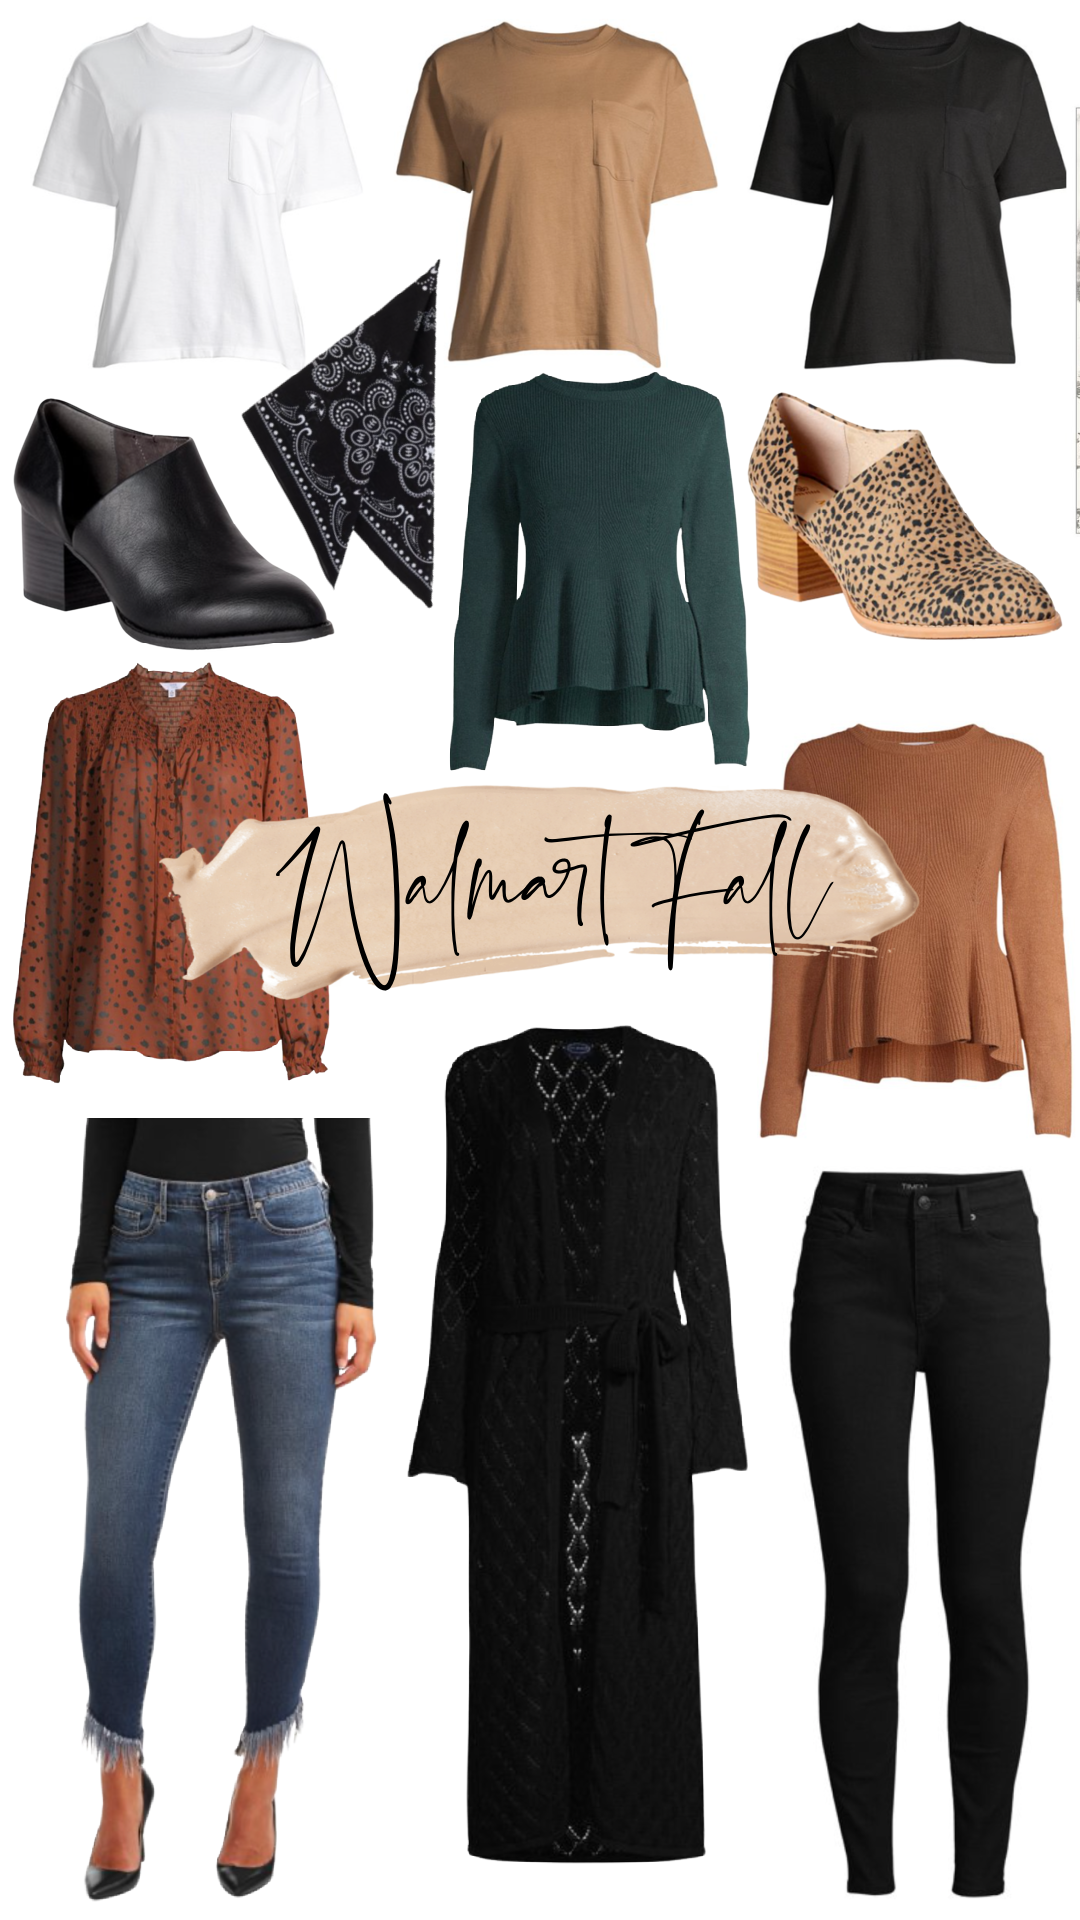 Walmart Fall Clothes - Nesting With Grace